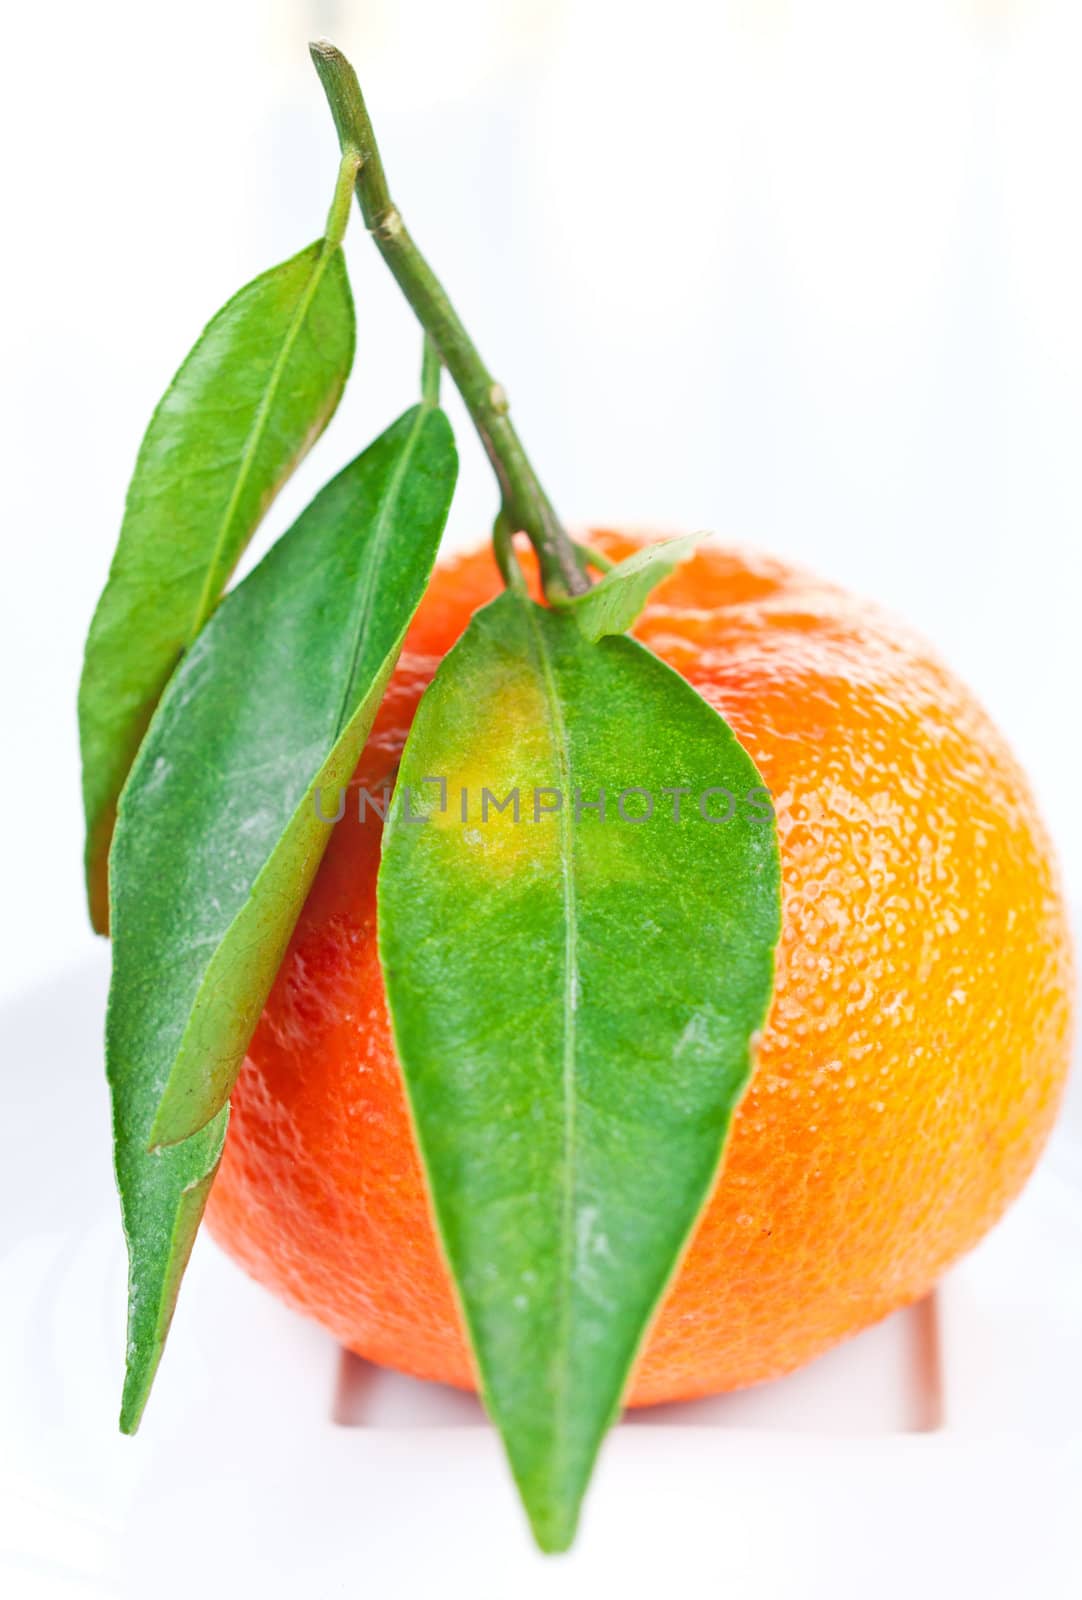 Tangerine with green leaves on a plate by Nanisimova